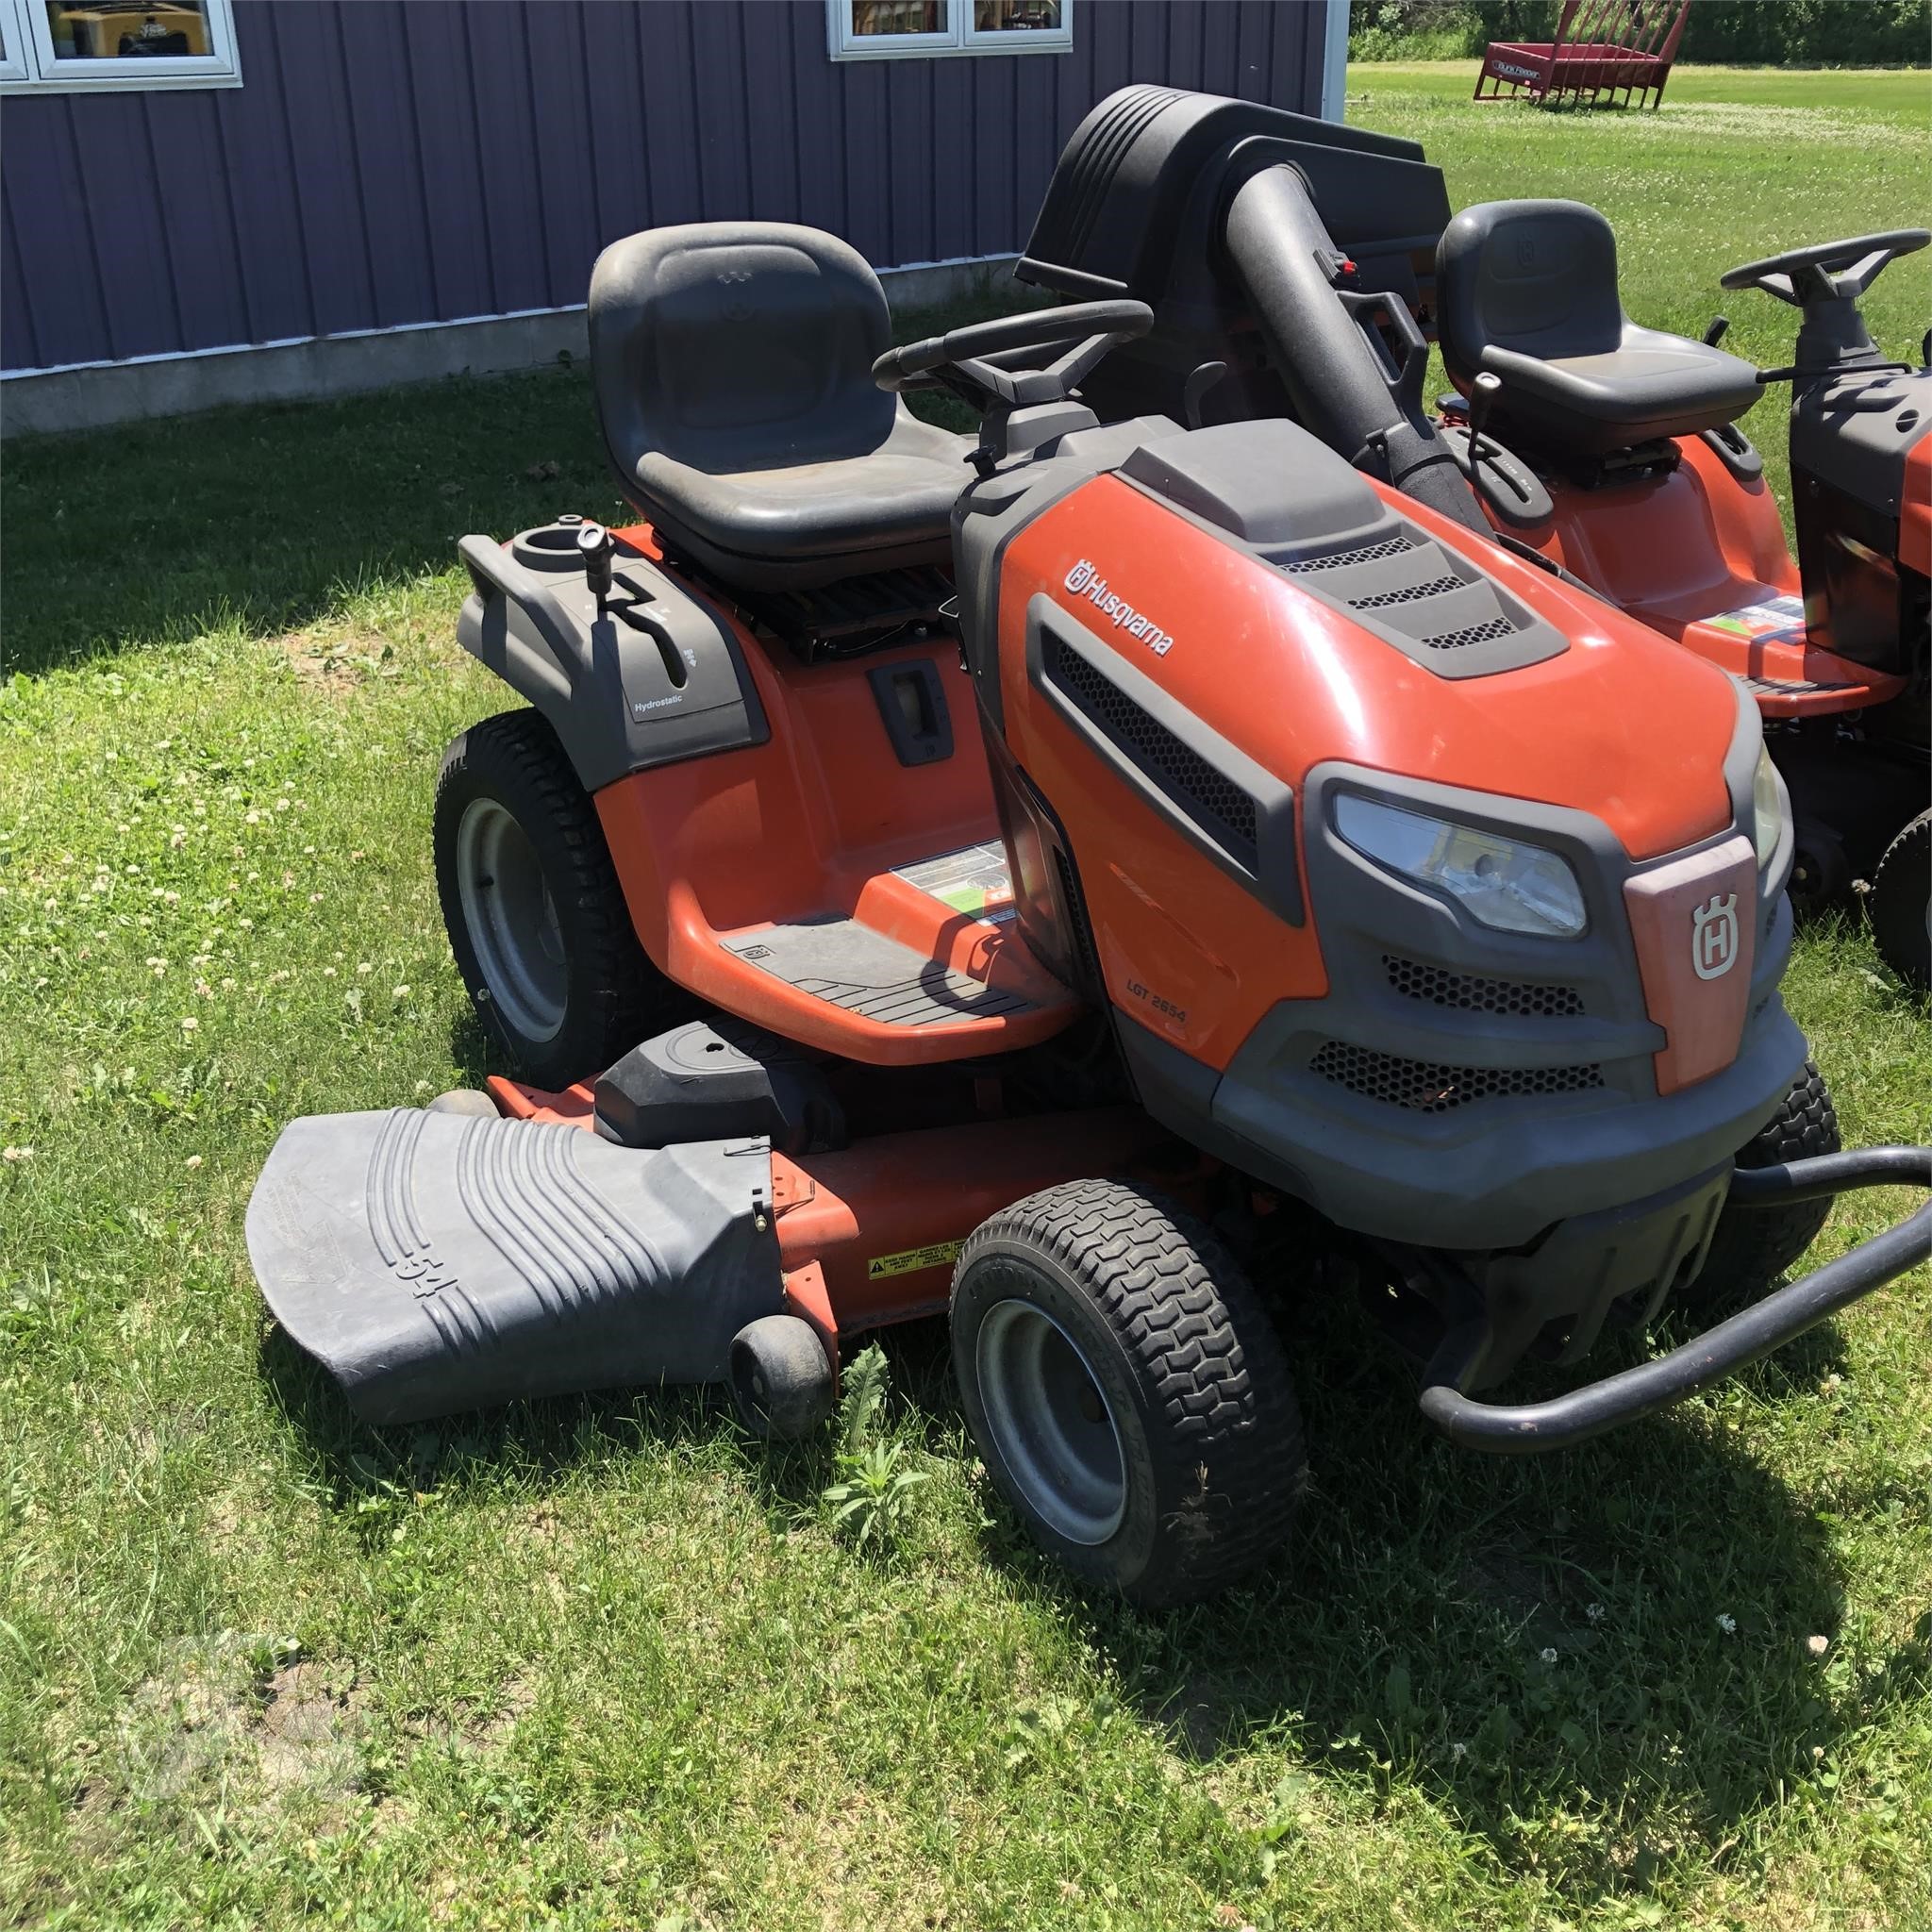 Husqvarna Lawn Mowers For Sale Near Me - Sold Archives Gsa Equipment New Used Lawn Mowers And